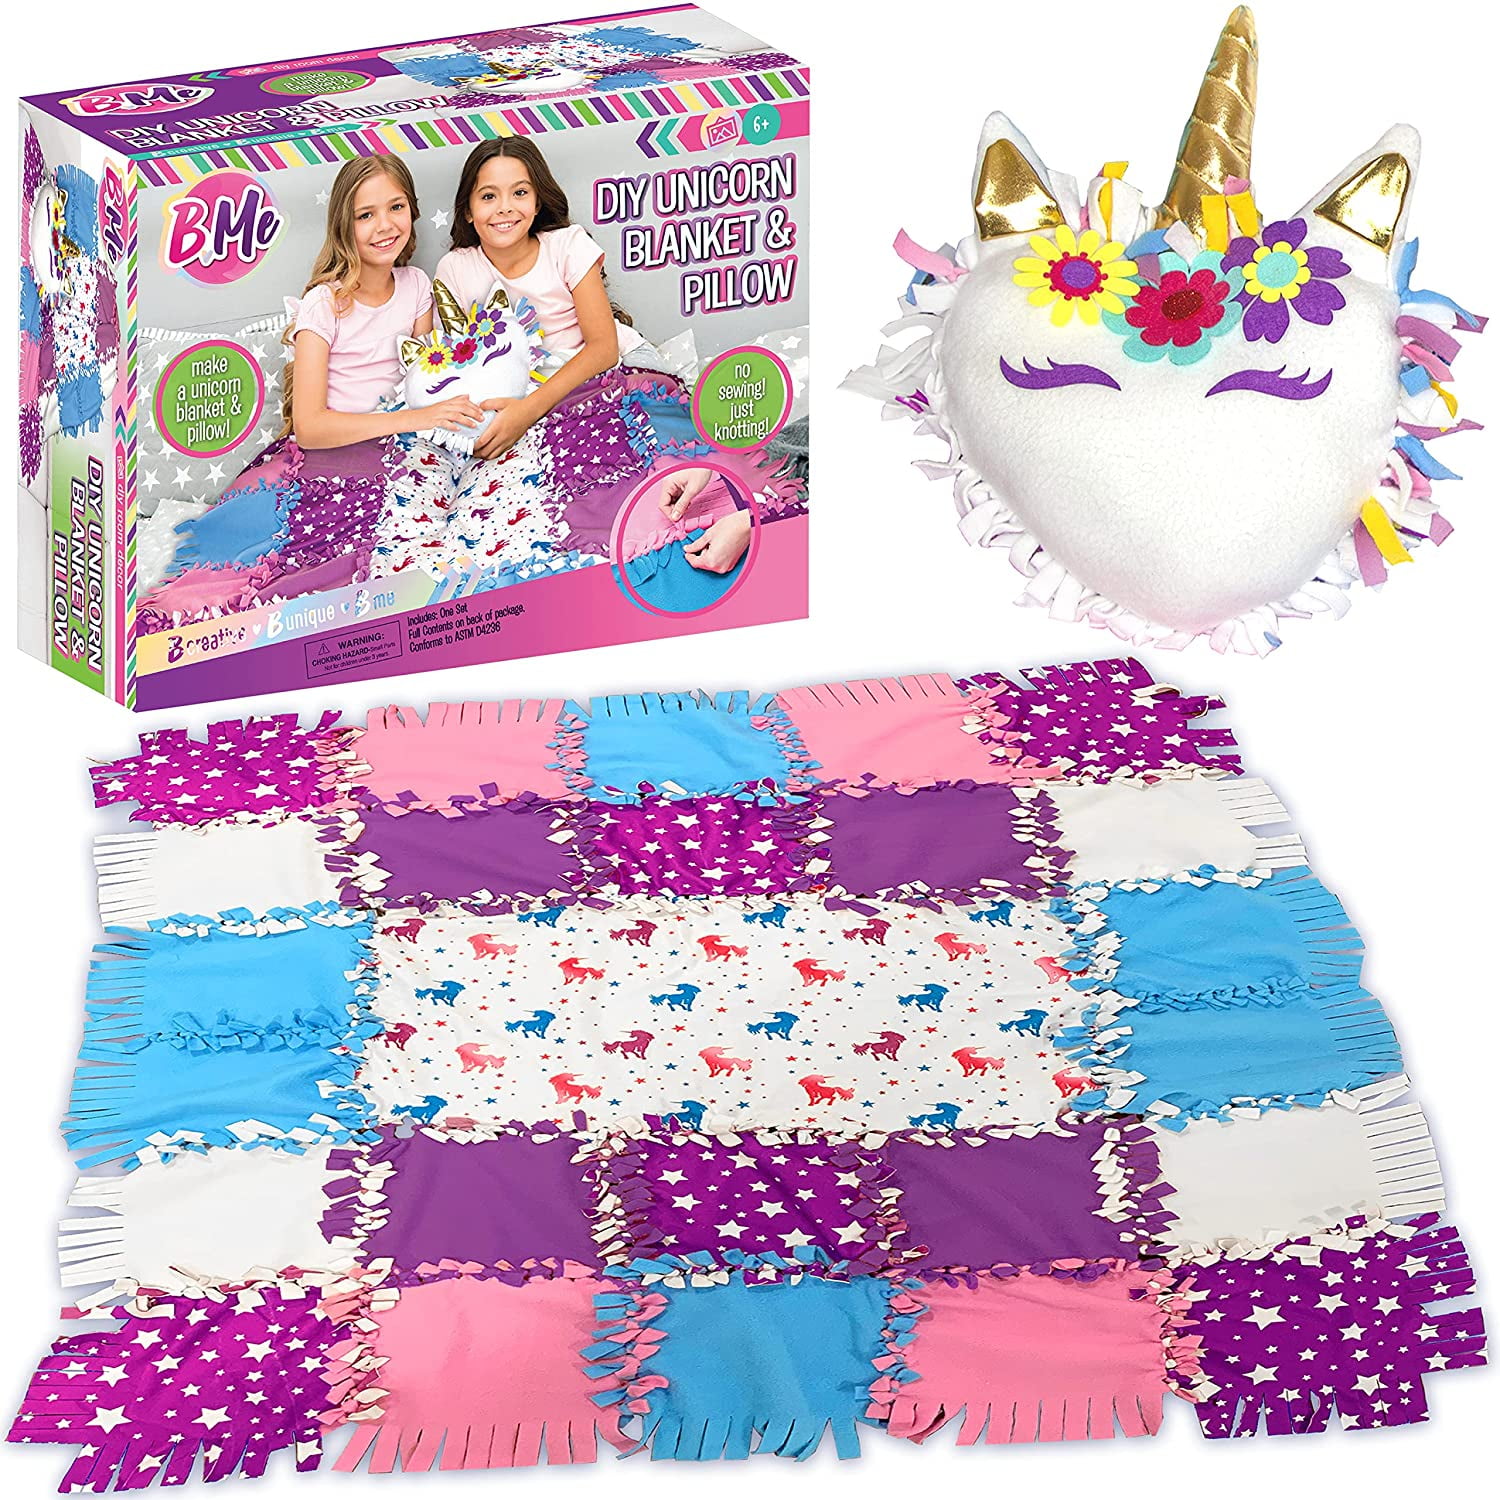 Ages 6+ Arts and Crafts Unicorn Gift for Girls No Sew Unicorn Pillow Creative Childrens Activity DIY Kits for Girls DIY Unicorn Pillow Kit for Girls Make Your Own Pillow Set for Kids 